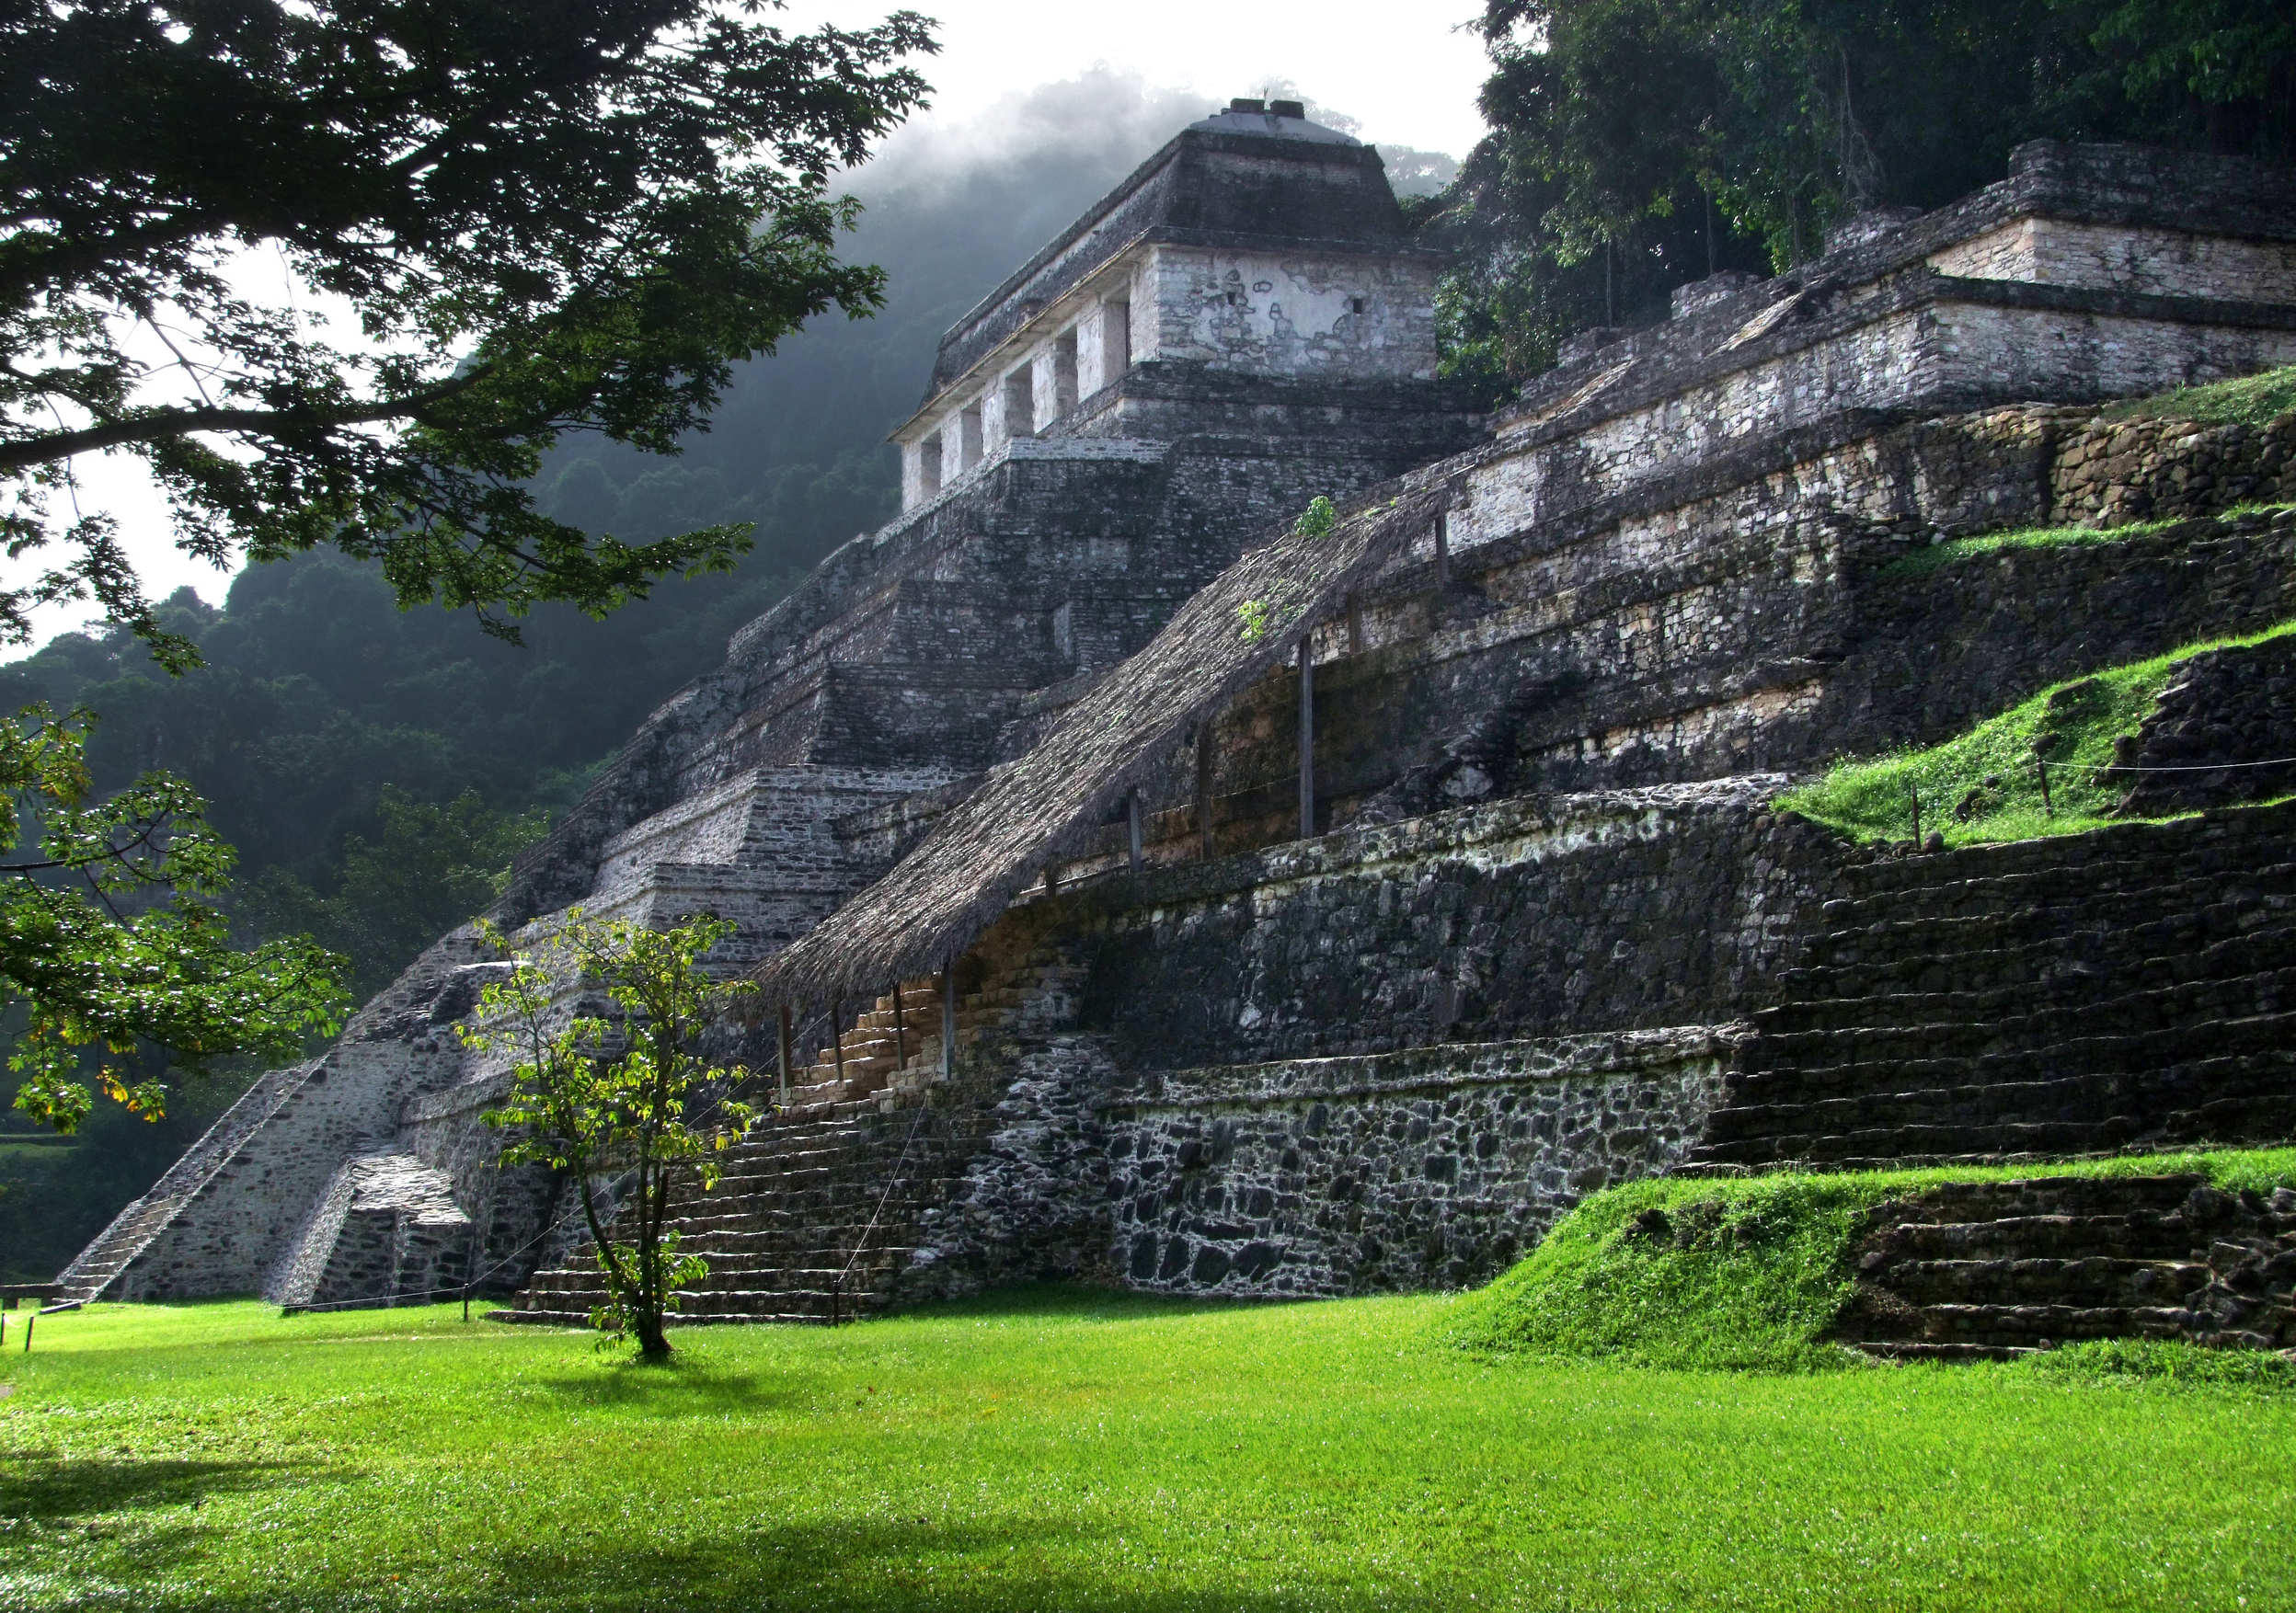 Experience Palenque